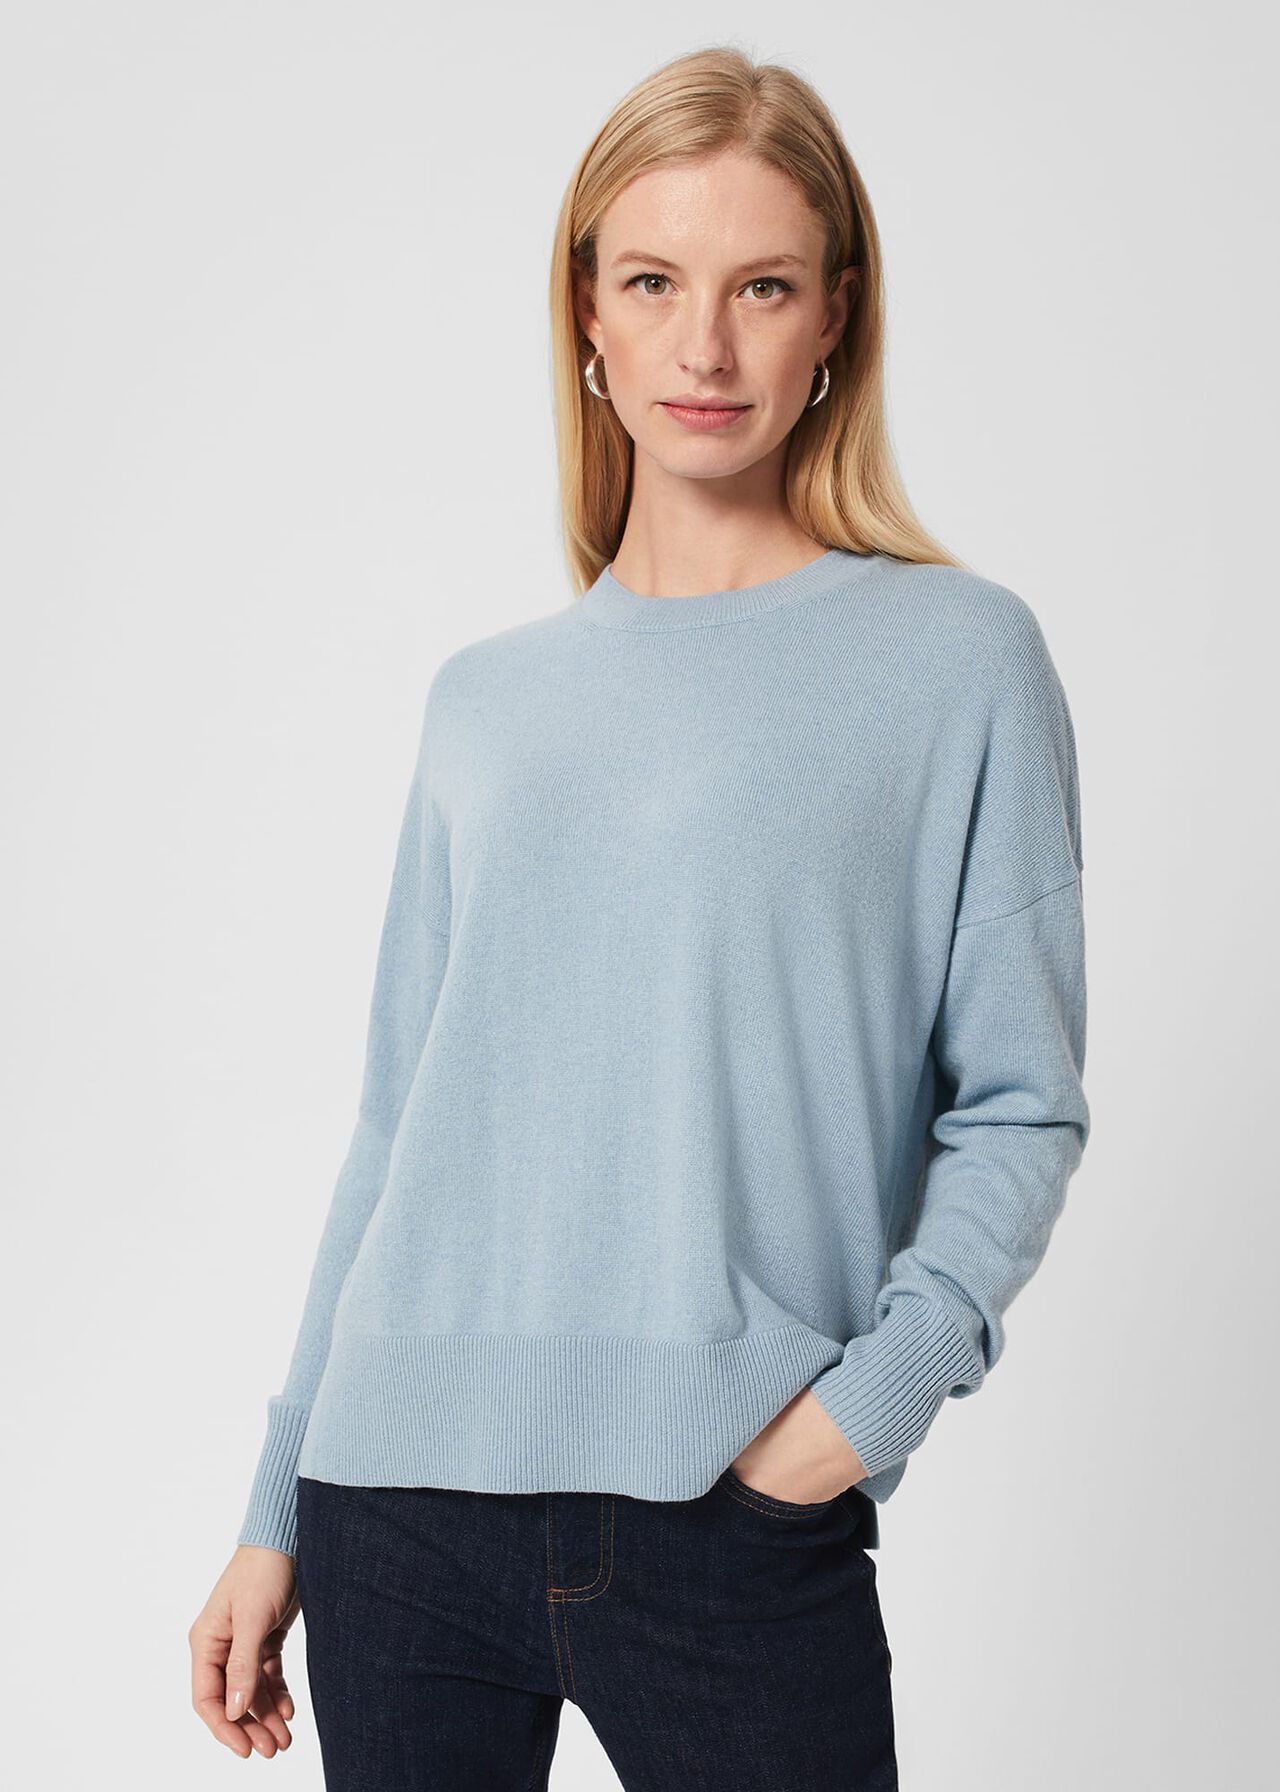 Lydia Button Sweater With Cashmere, Dusky Blue, hi-res